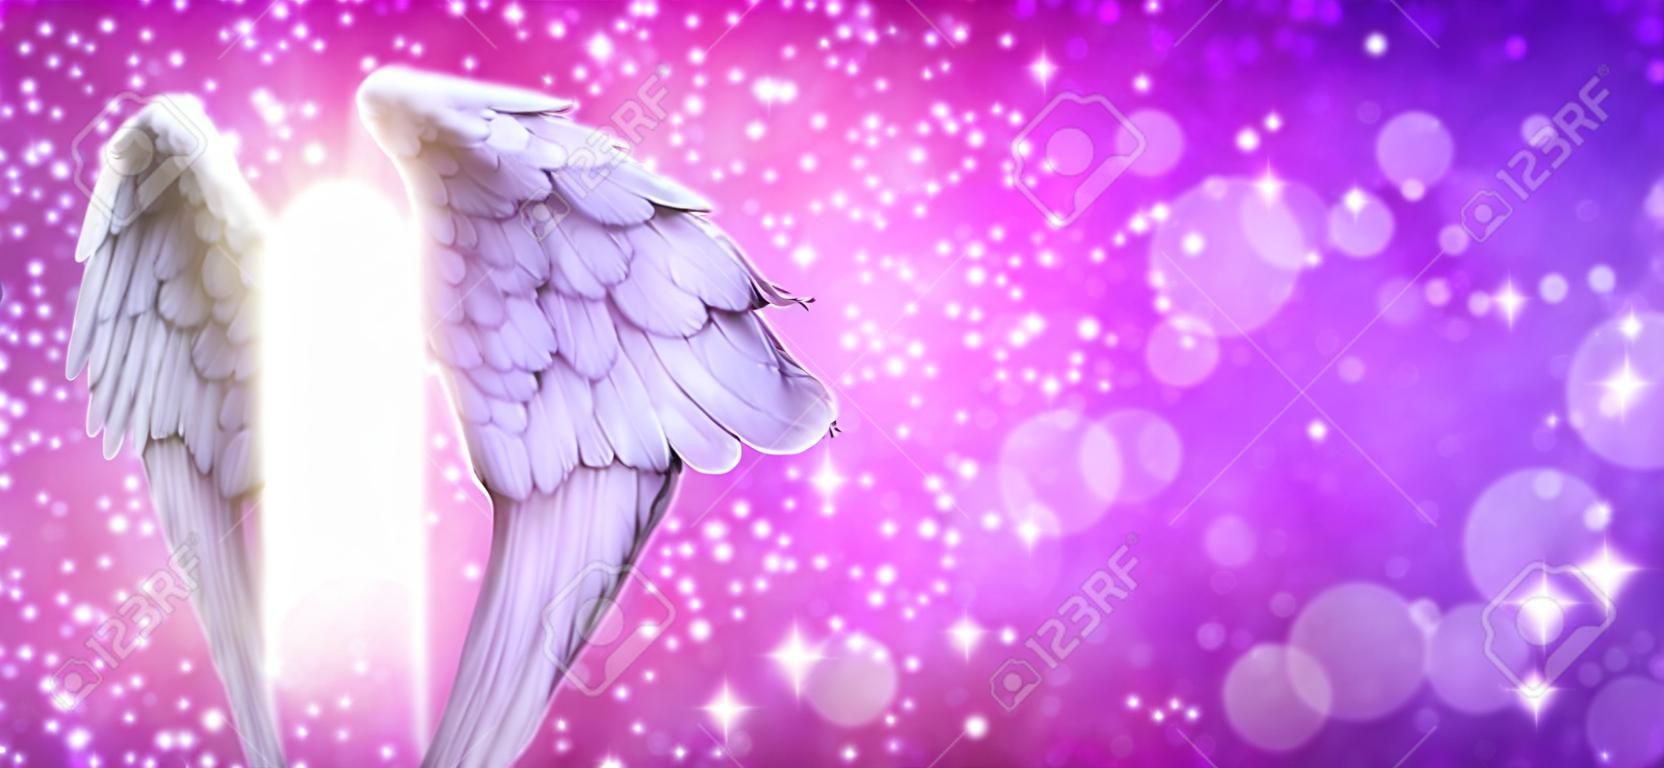 Purple Pink Sparkle Angel Wings Message Board - pair of Angel wings on left side with random white and pink sparkles on a vibrant pink purple bokeh background and copy space